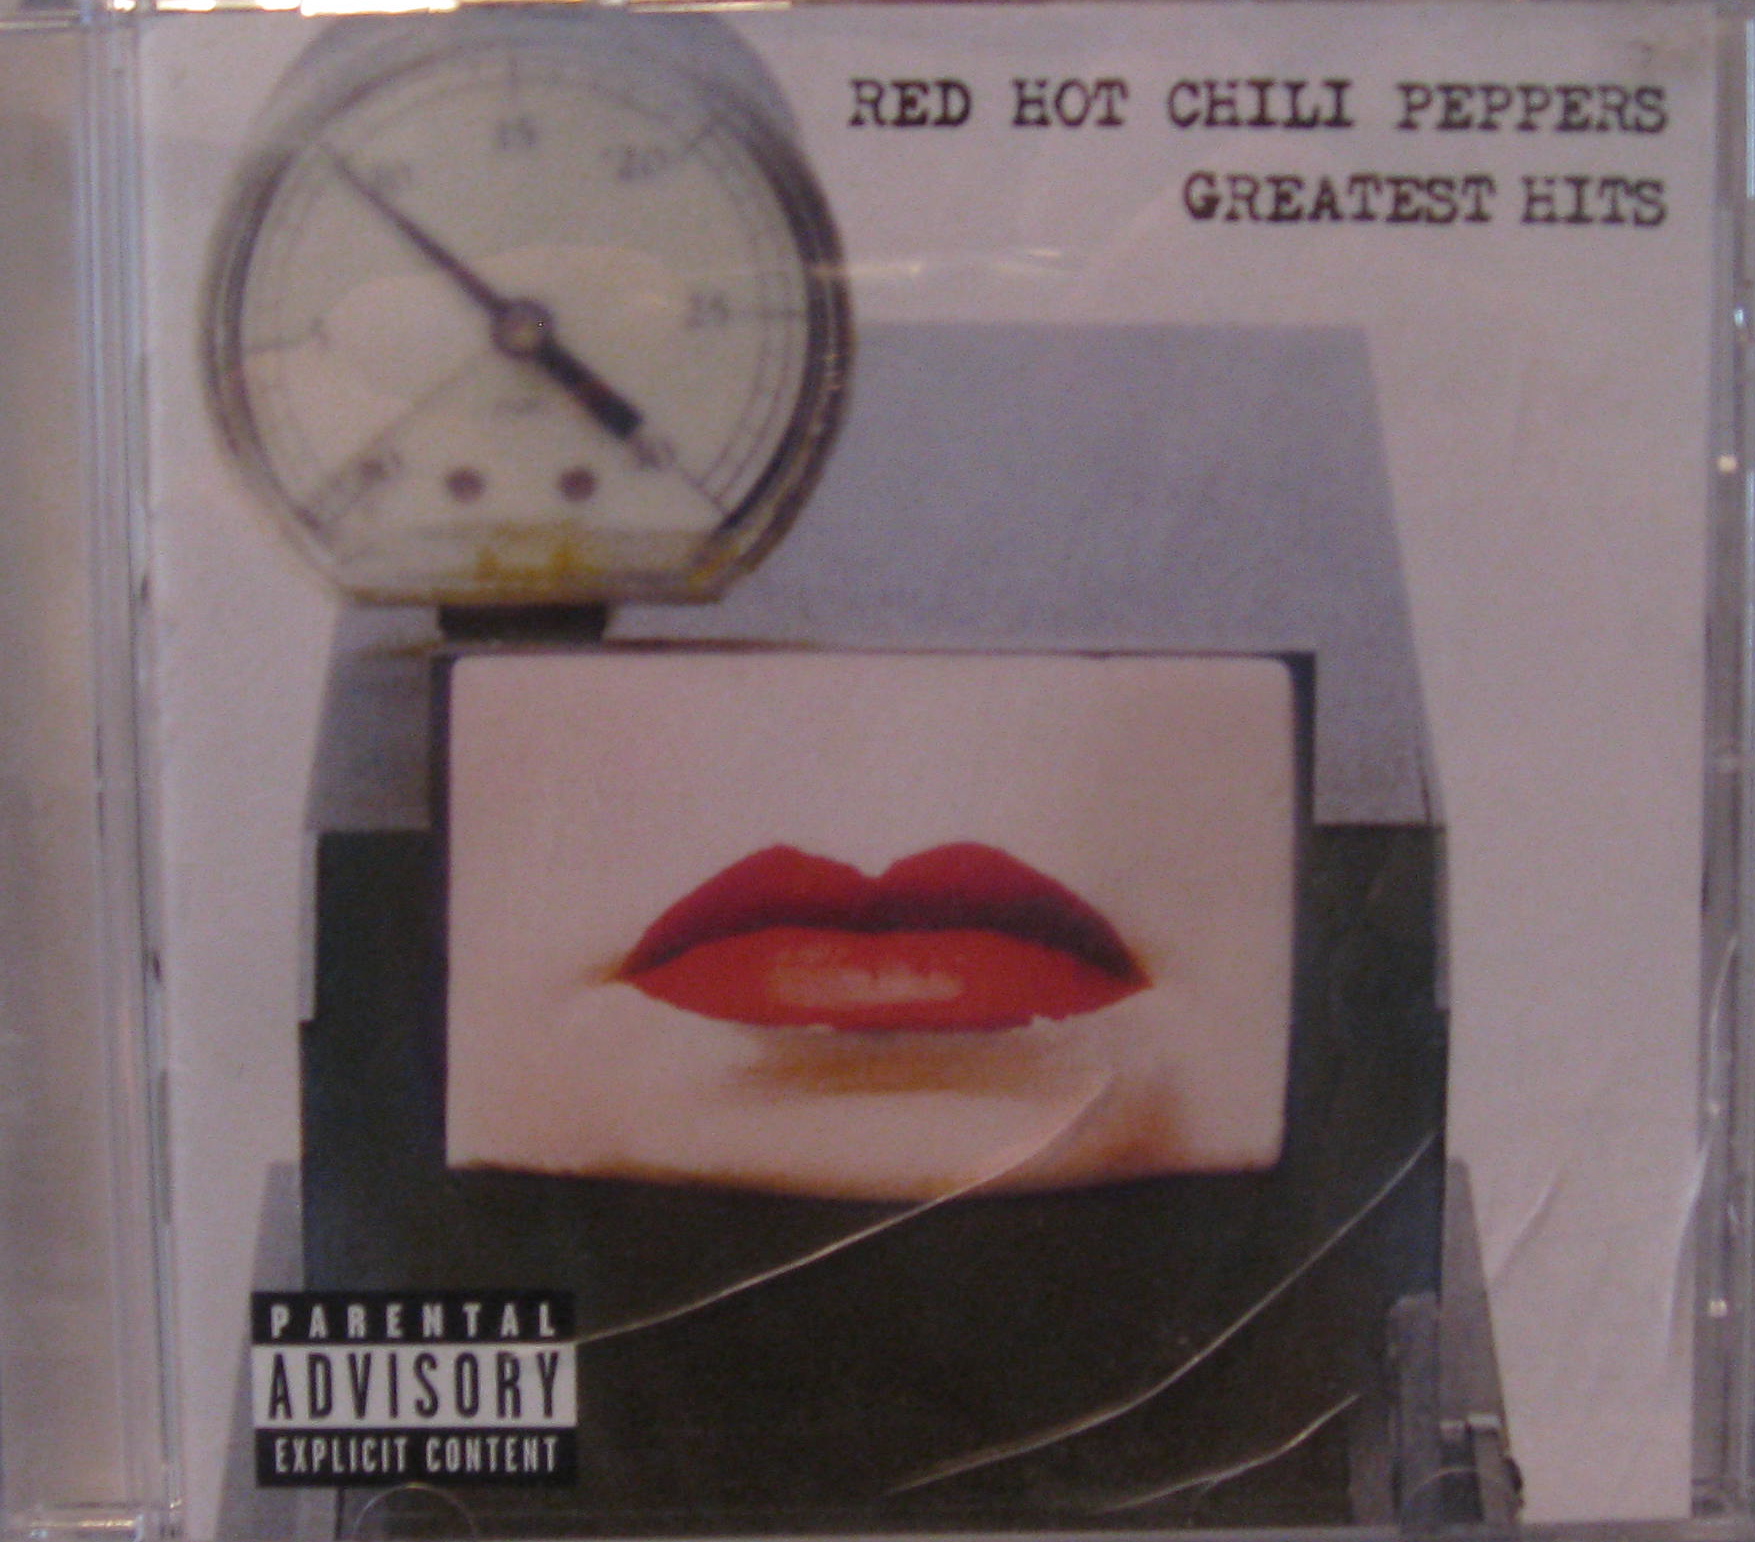 Red Hot Chili Peppers- greatest hits